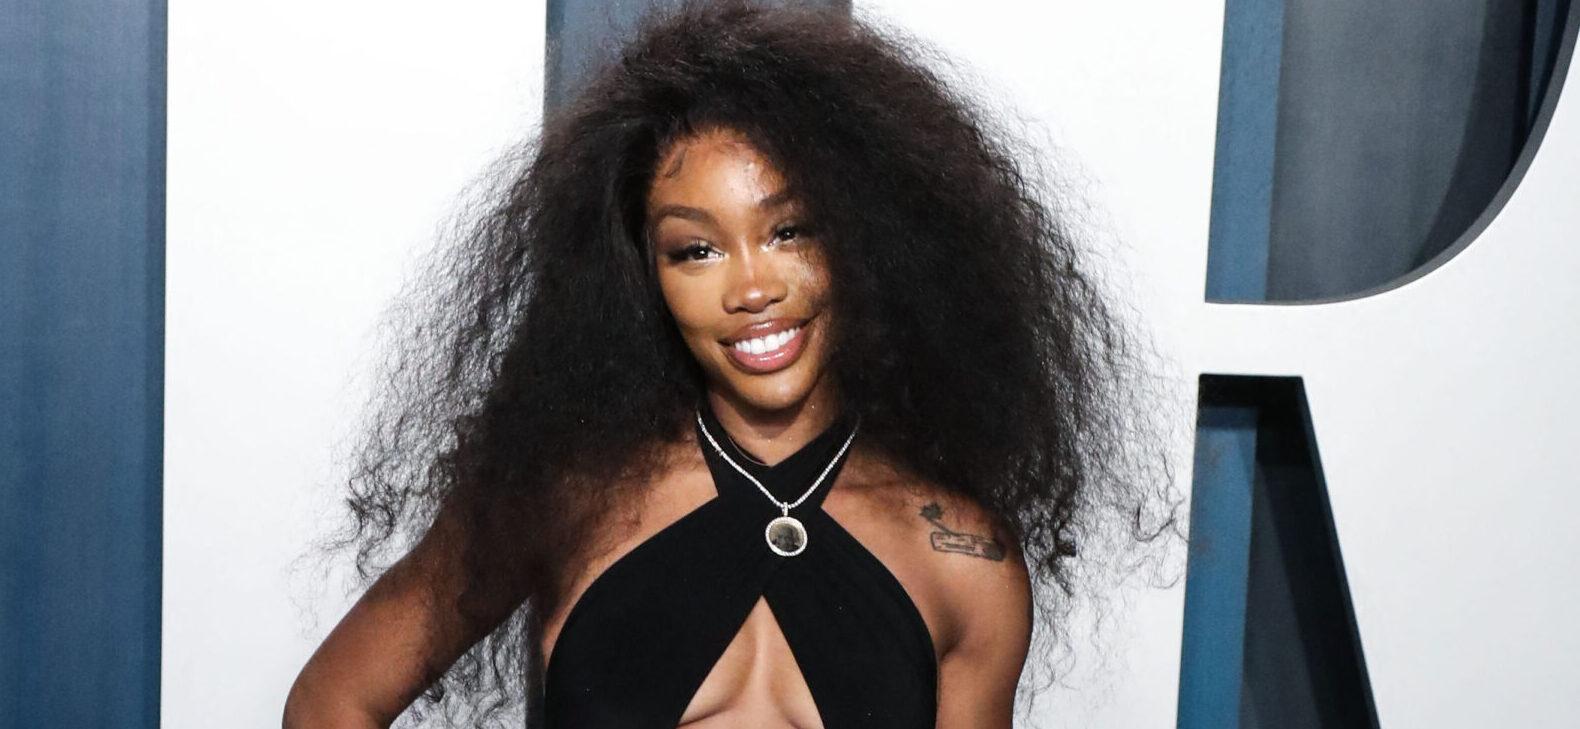 Fans Brand SZA A 'Liar' For Denying 'Facelift,' Post 'Then' And 'Now' Images of Singer